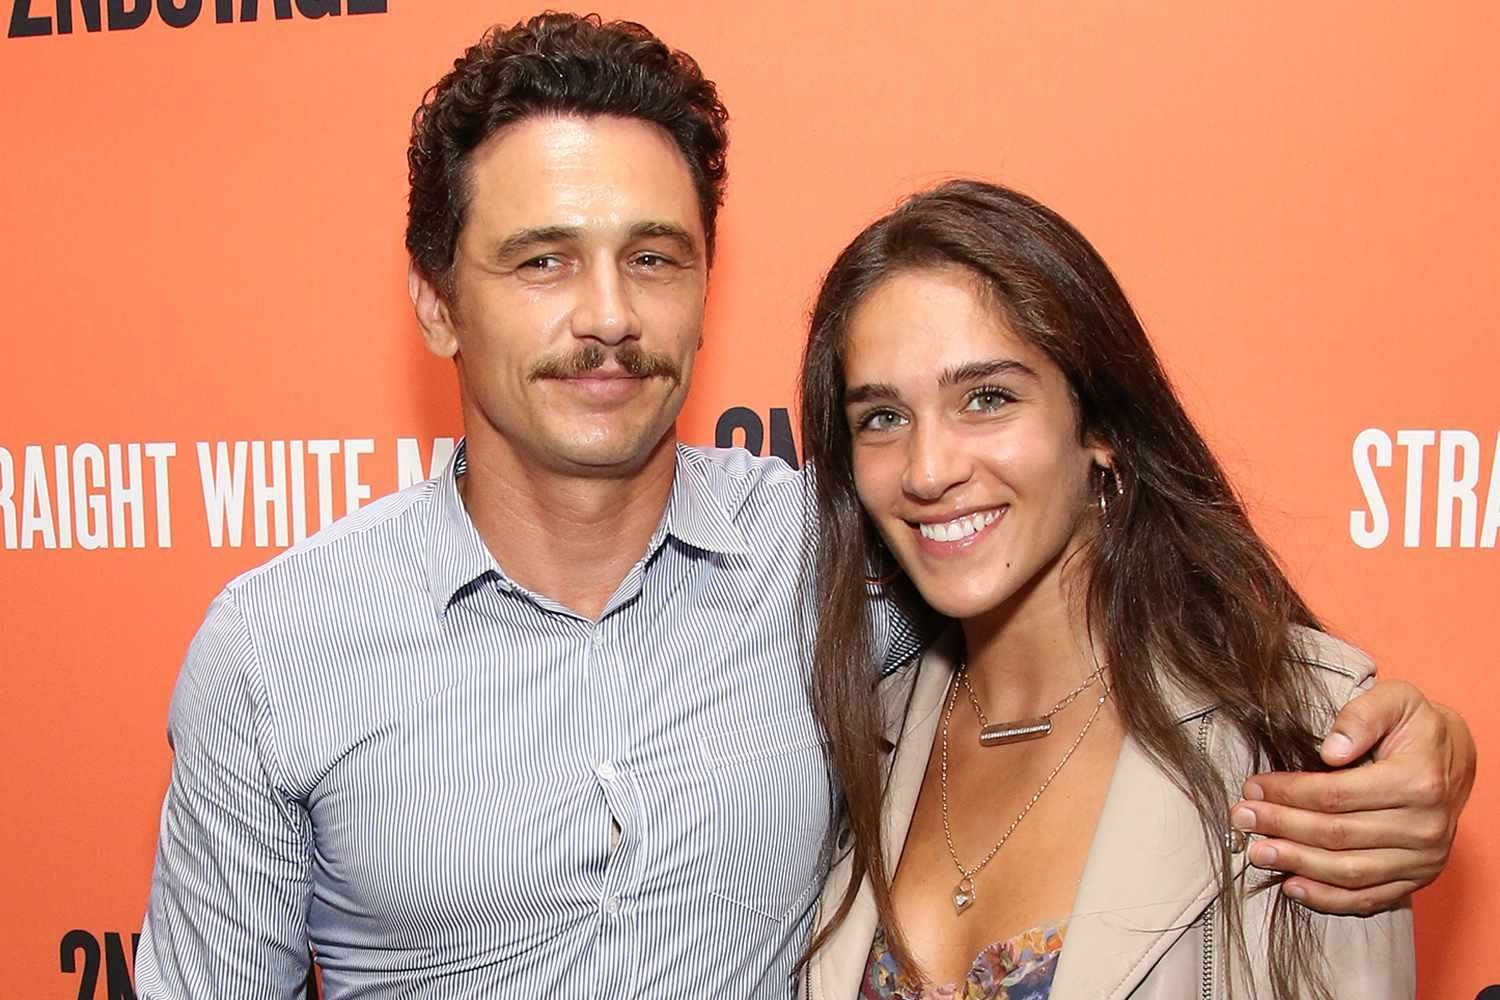 James Franco and Isabel Pakzad (Source: People)